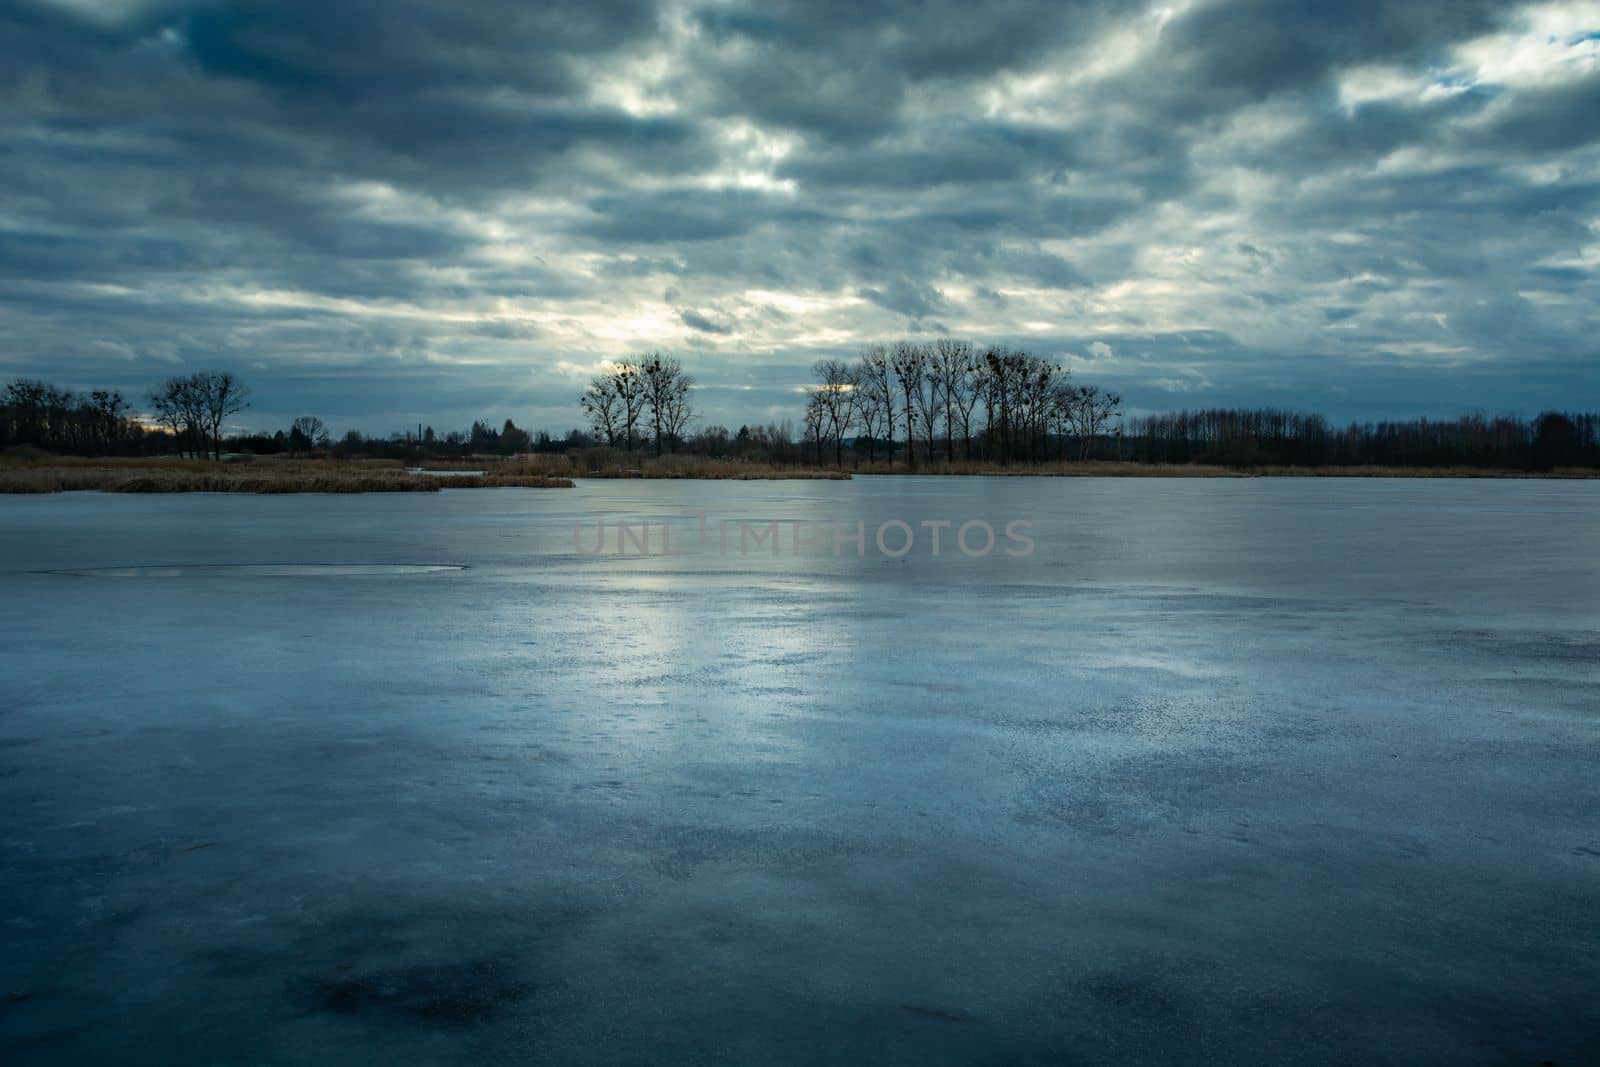 Evening view of a frozen lake and cloudy sky, Stankow eastern Poland